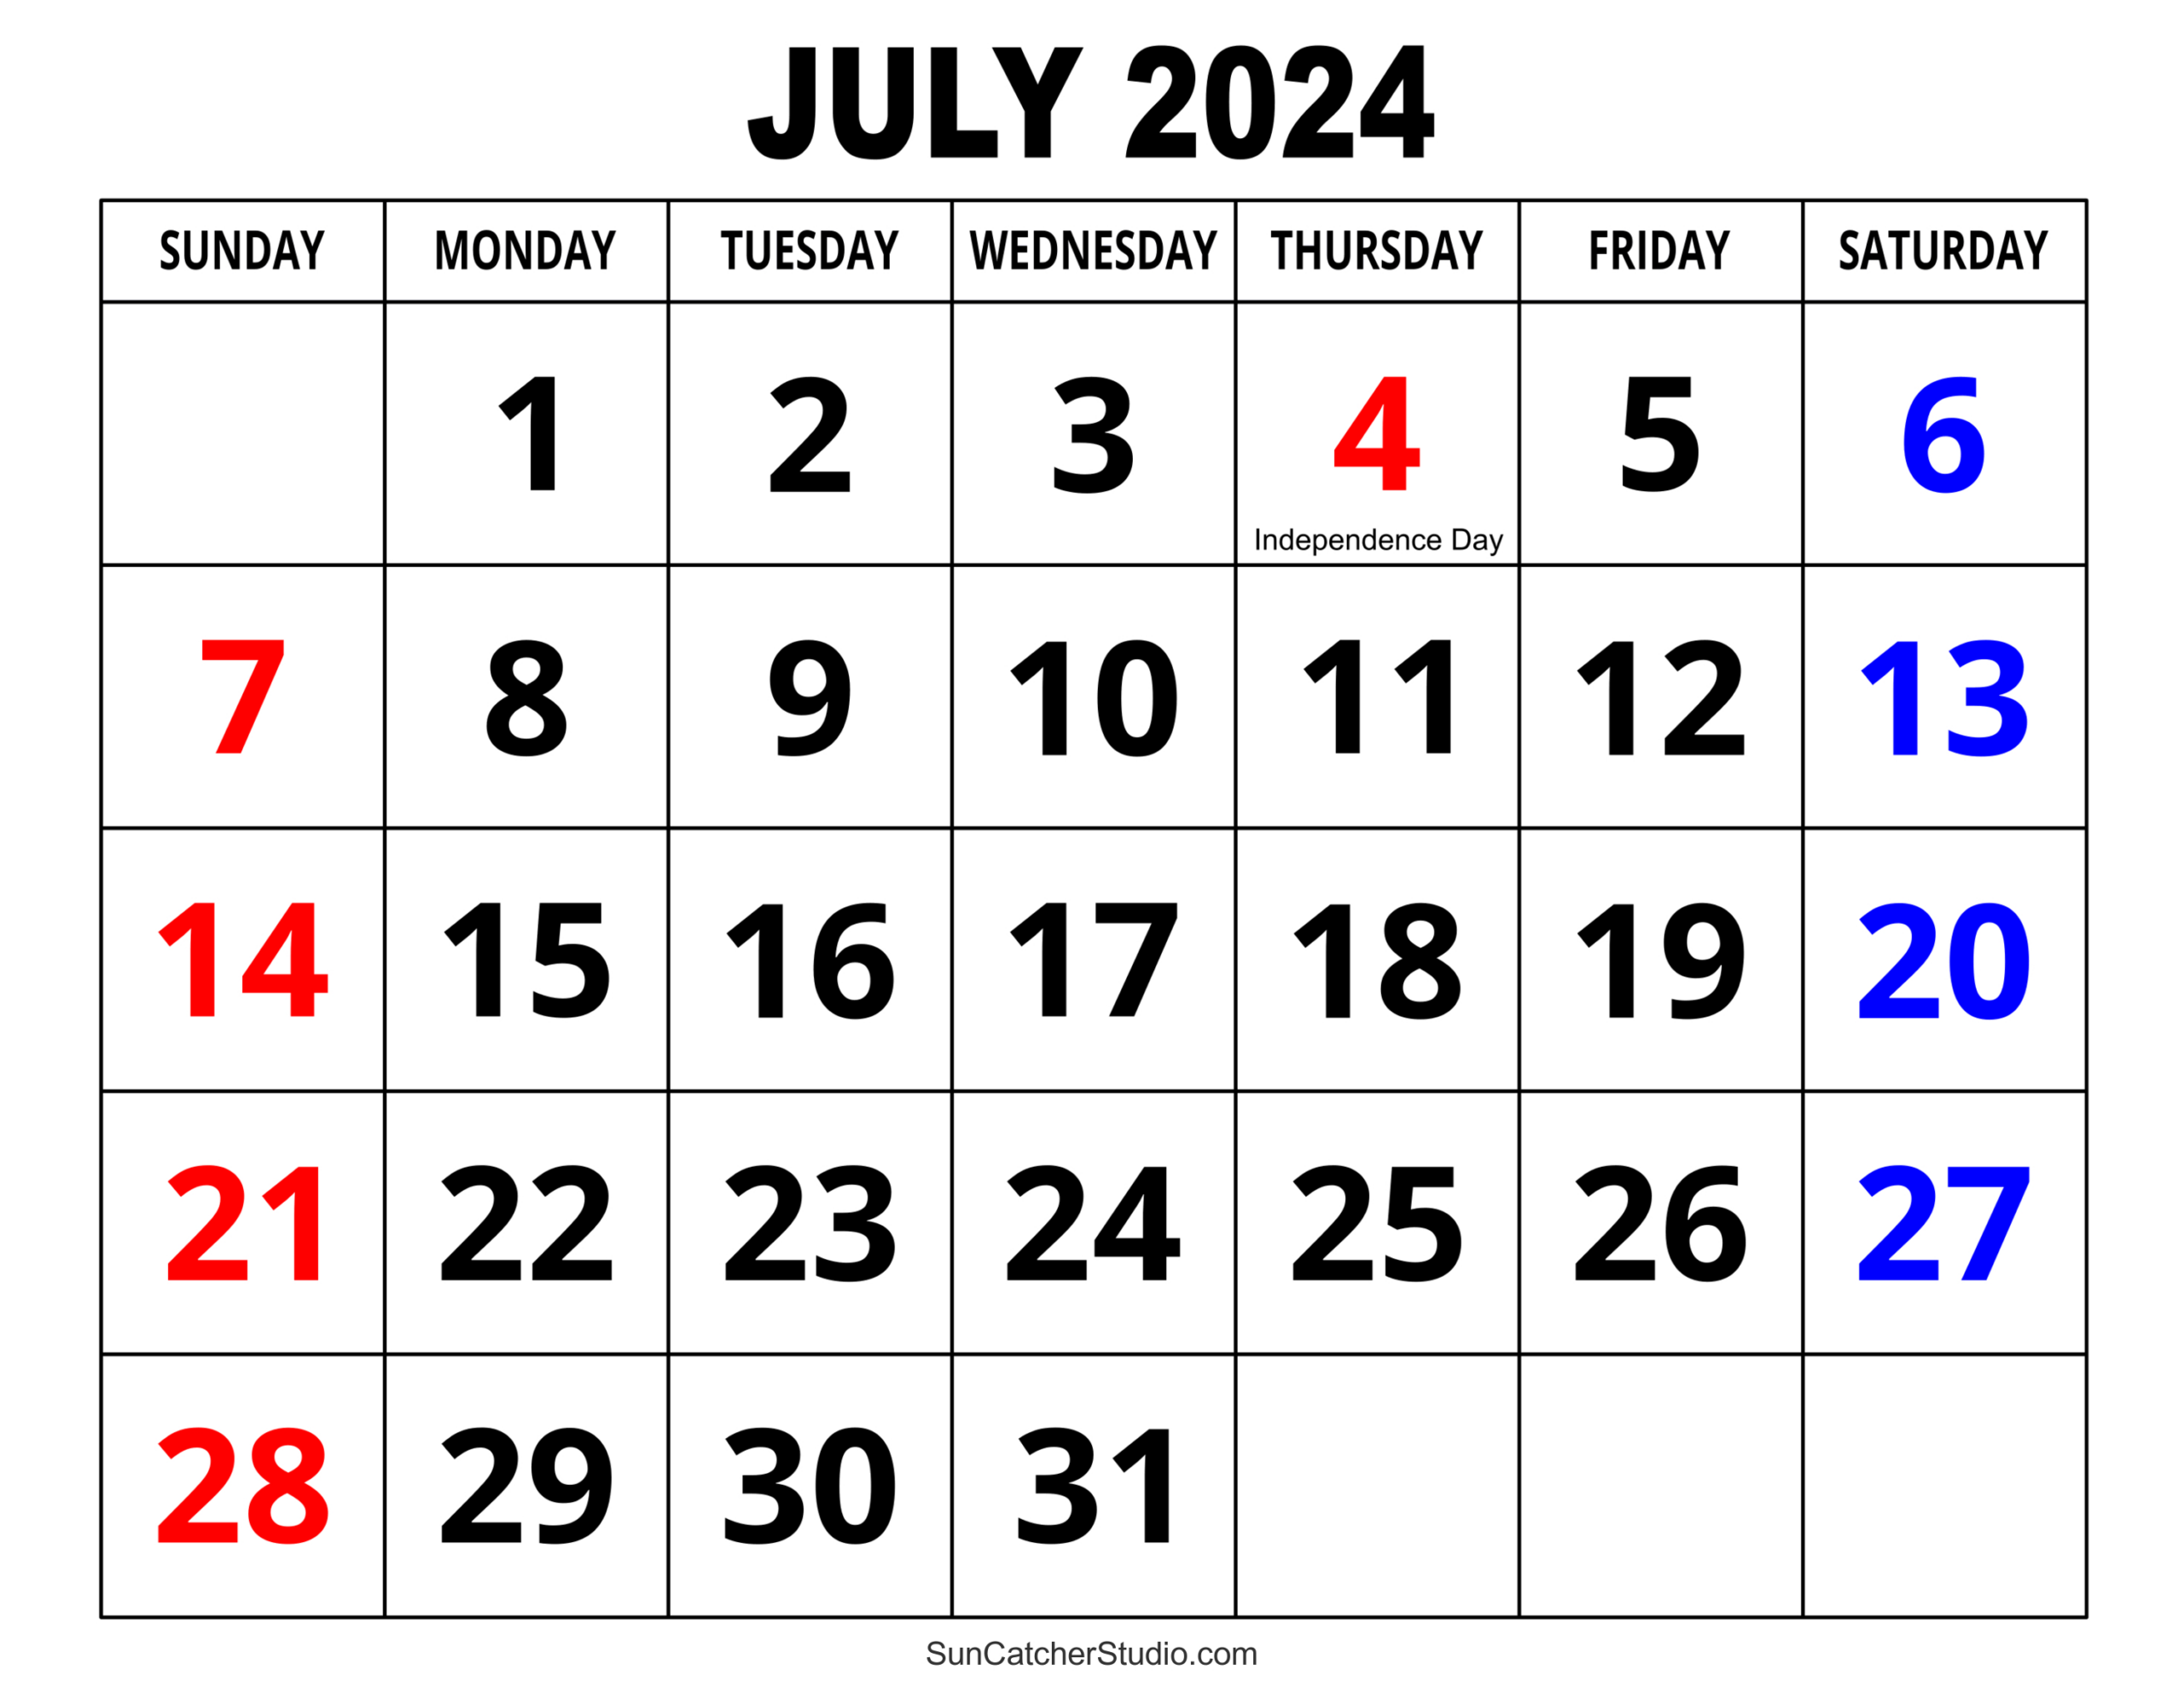 July 2024 Calendar (Free Printable) – Diy Projects, Patterns regarding 26 July 2024 Calendar Printable